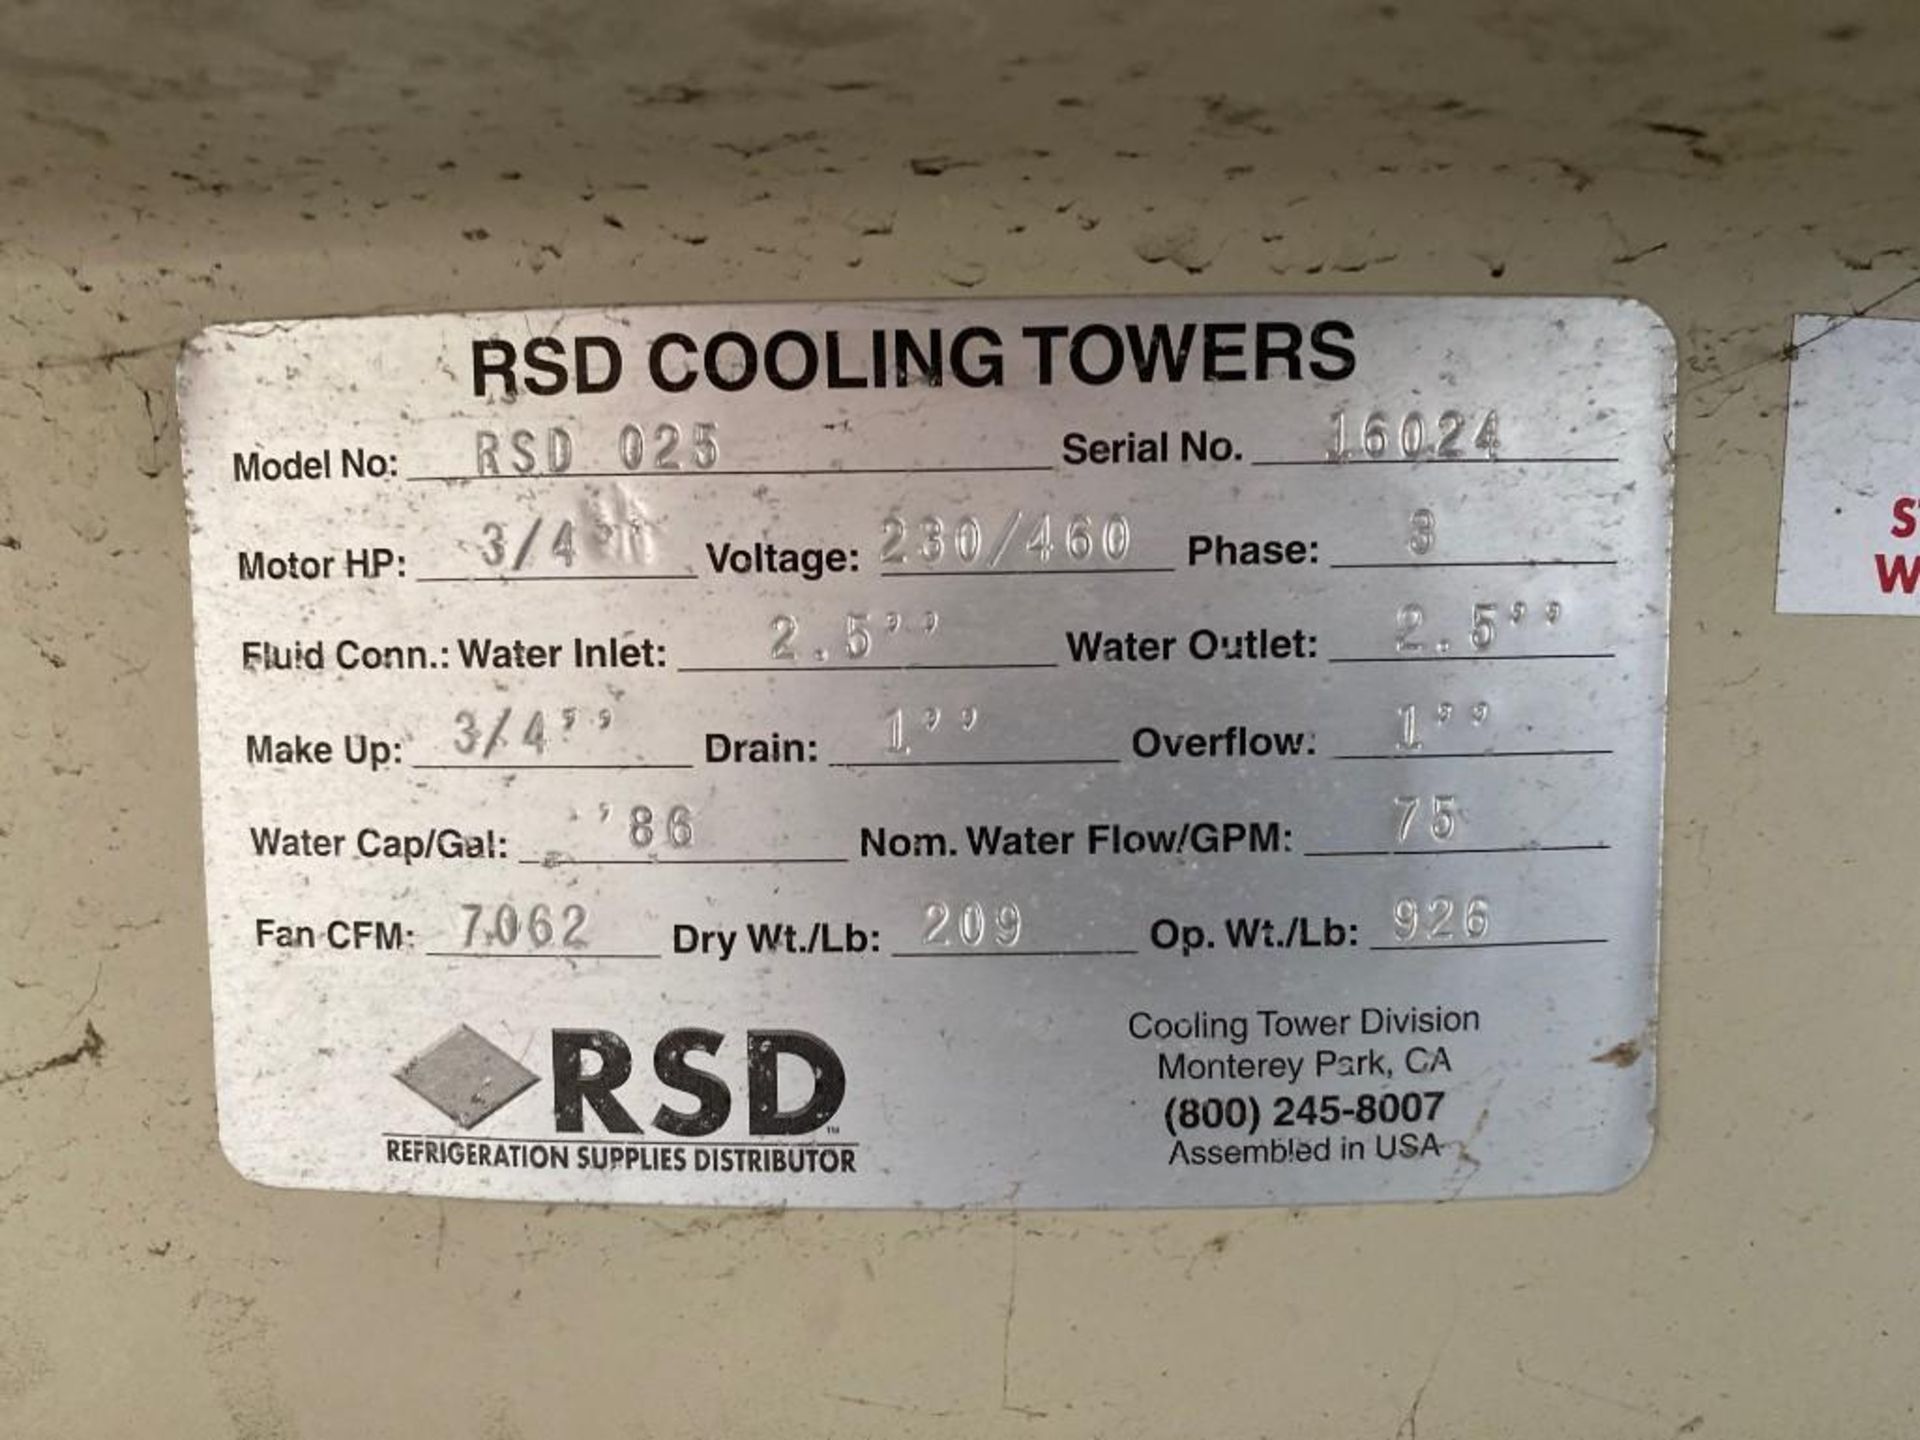 RSD 025 Cooling Tower, 86 Gallon Cap., s/n 16024 - Image 2 of 2